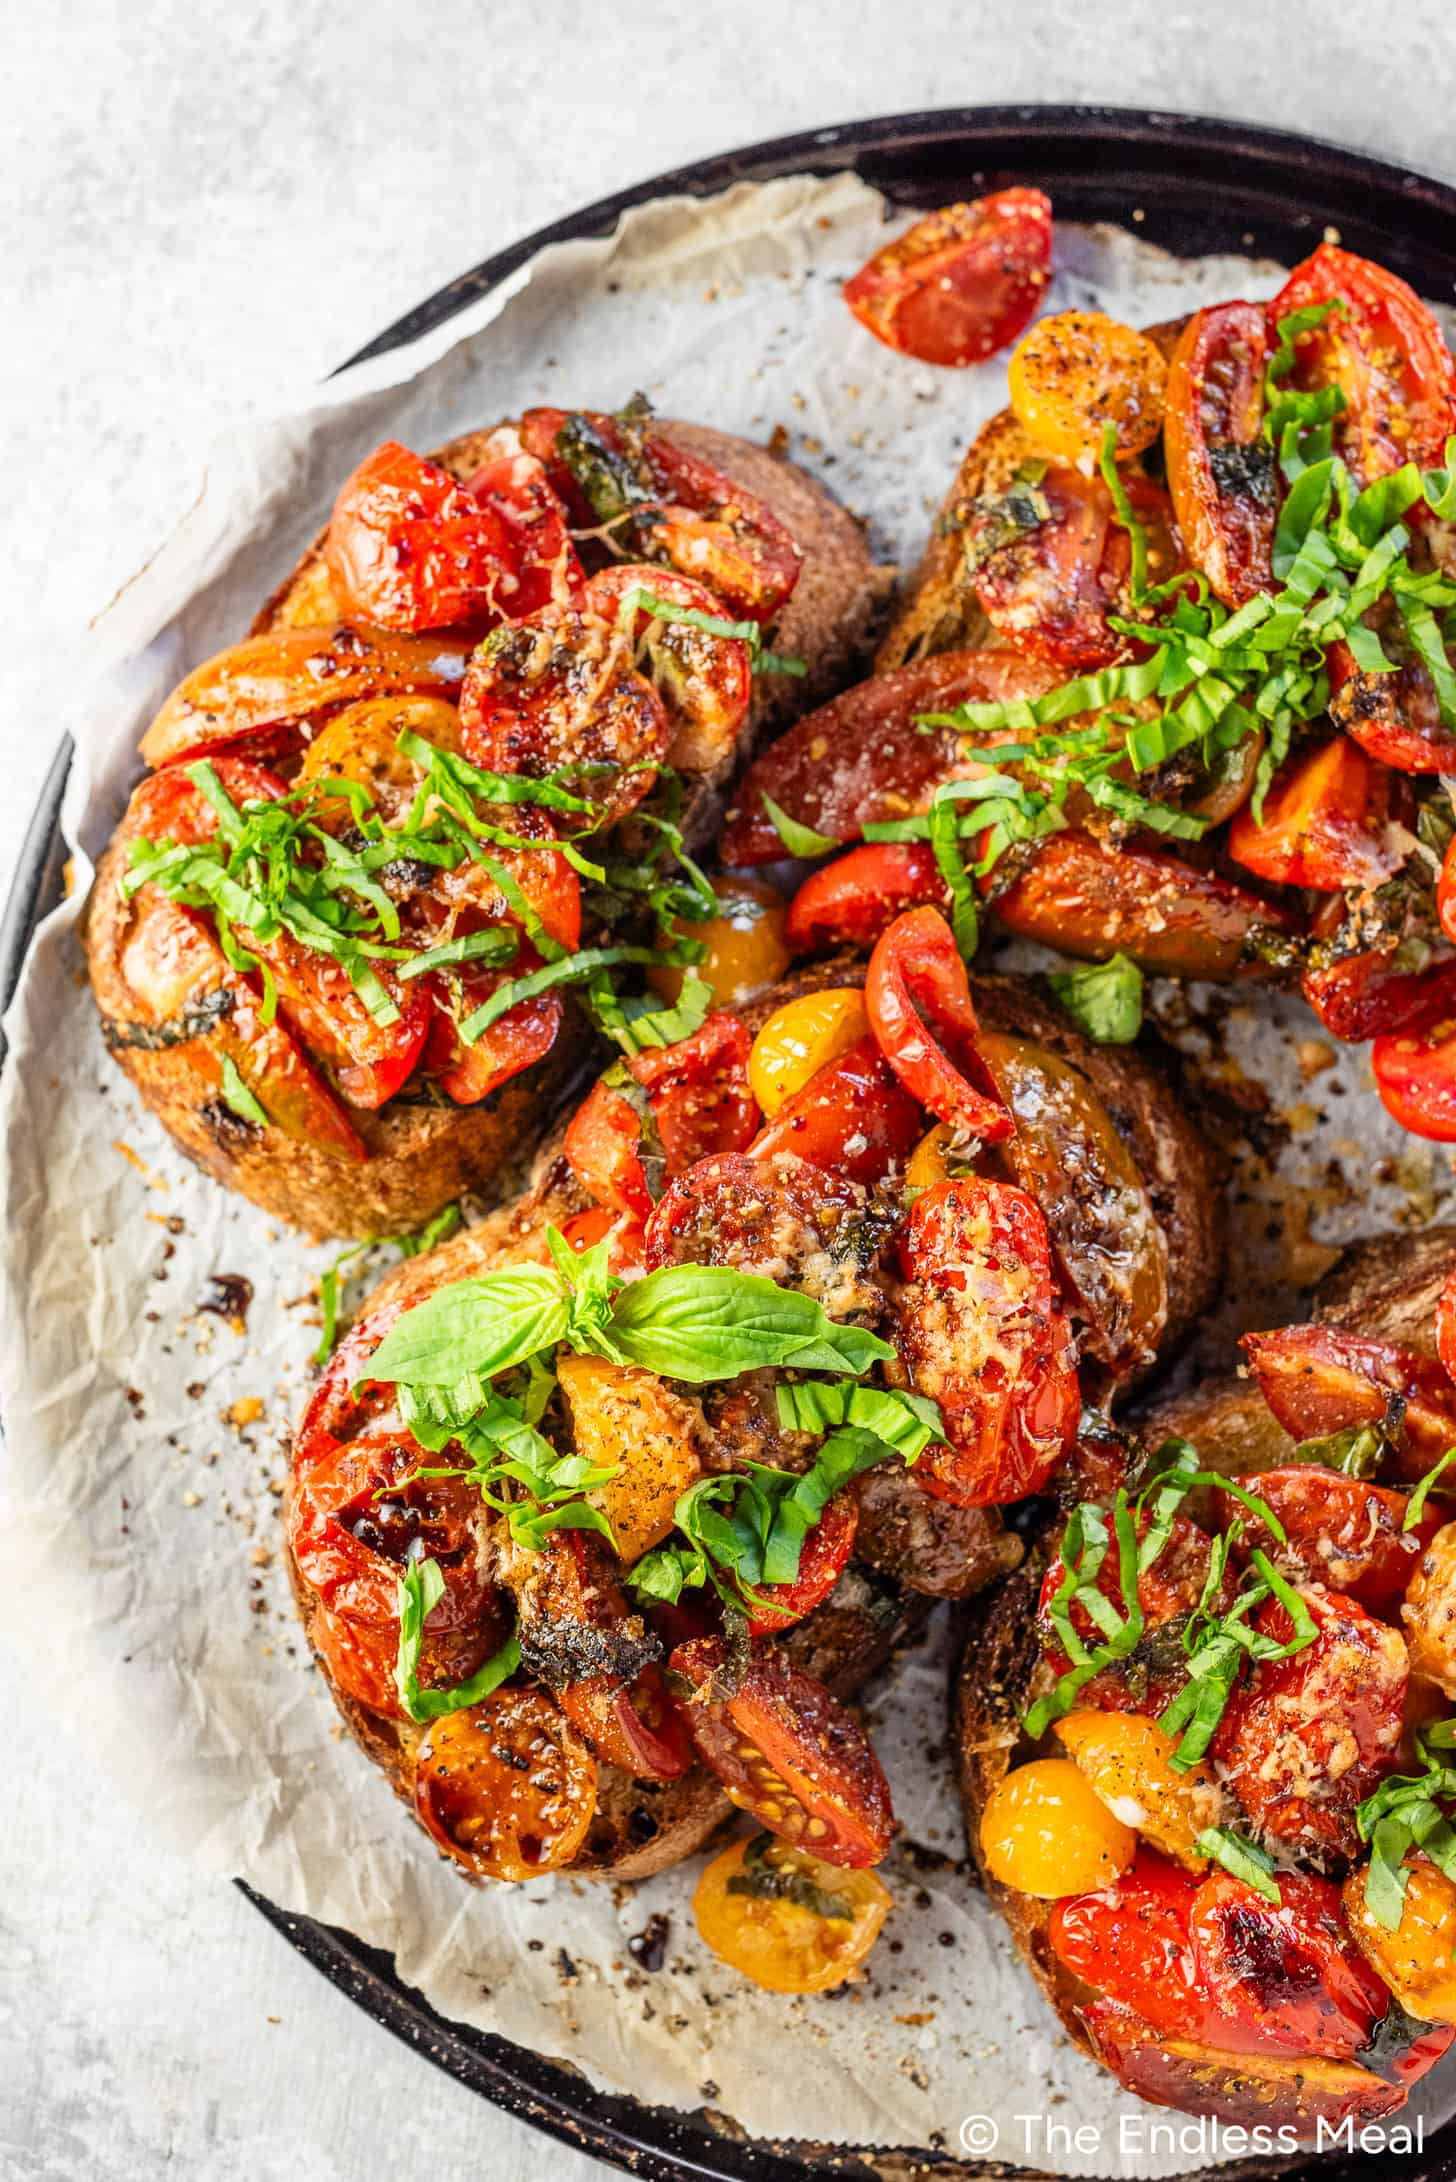 This Bruschetta Dinner hot out of the oven on a baking sheet